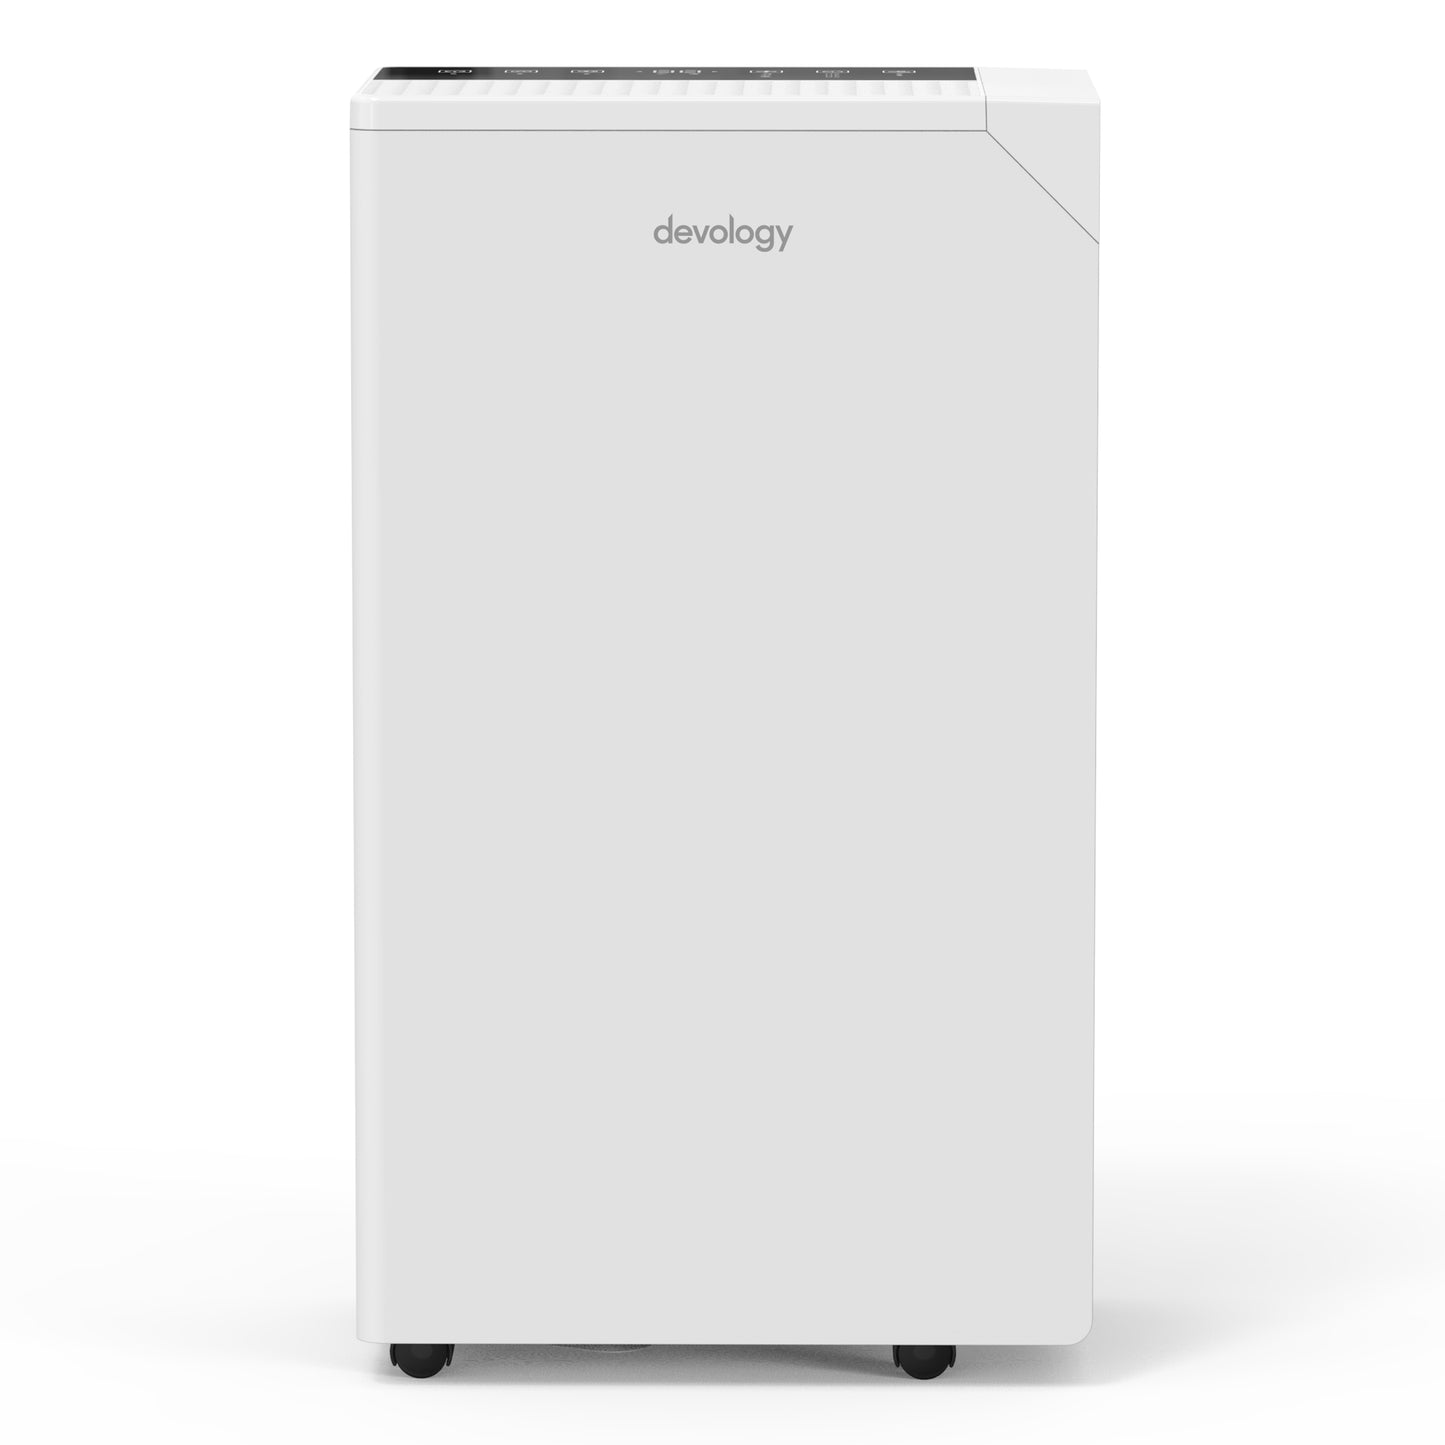 Devology 20L/Day Digital Dehumidifier - WIFI App - 3.5L Water Tank, Sleep Mode, 24H Timer Laundry Drying - Portable Electric Mould, Damp and Condensation Remover - Bedroom, Basement, Garage & Kitchen